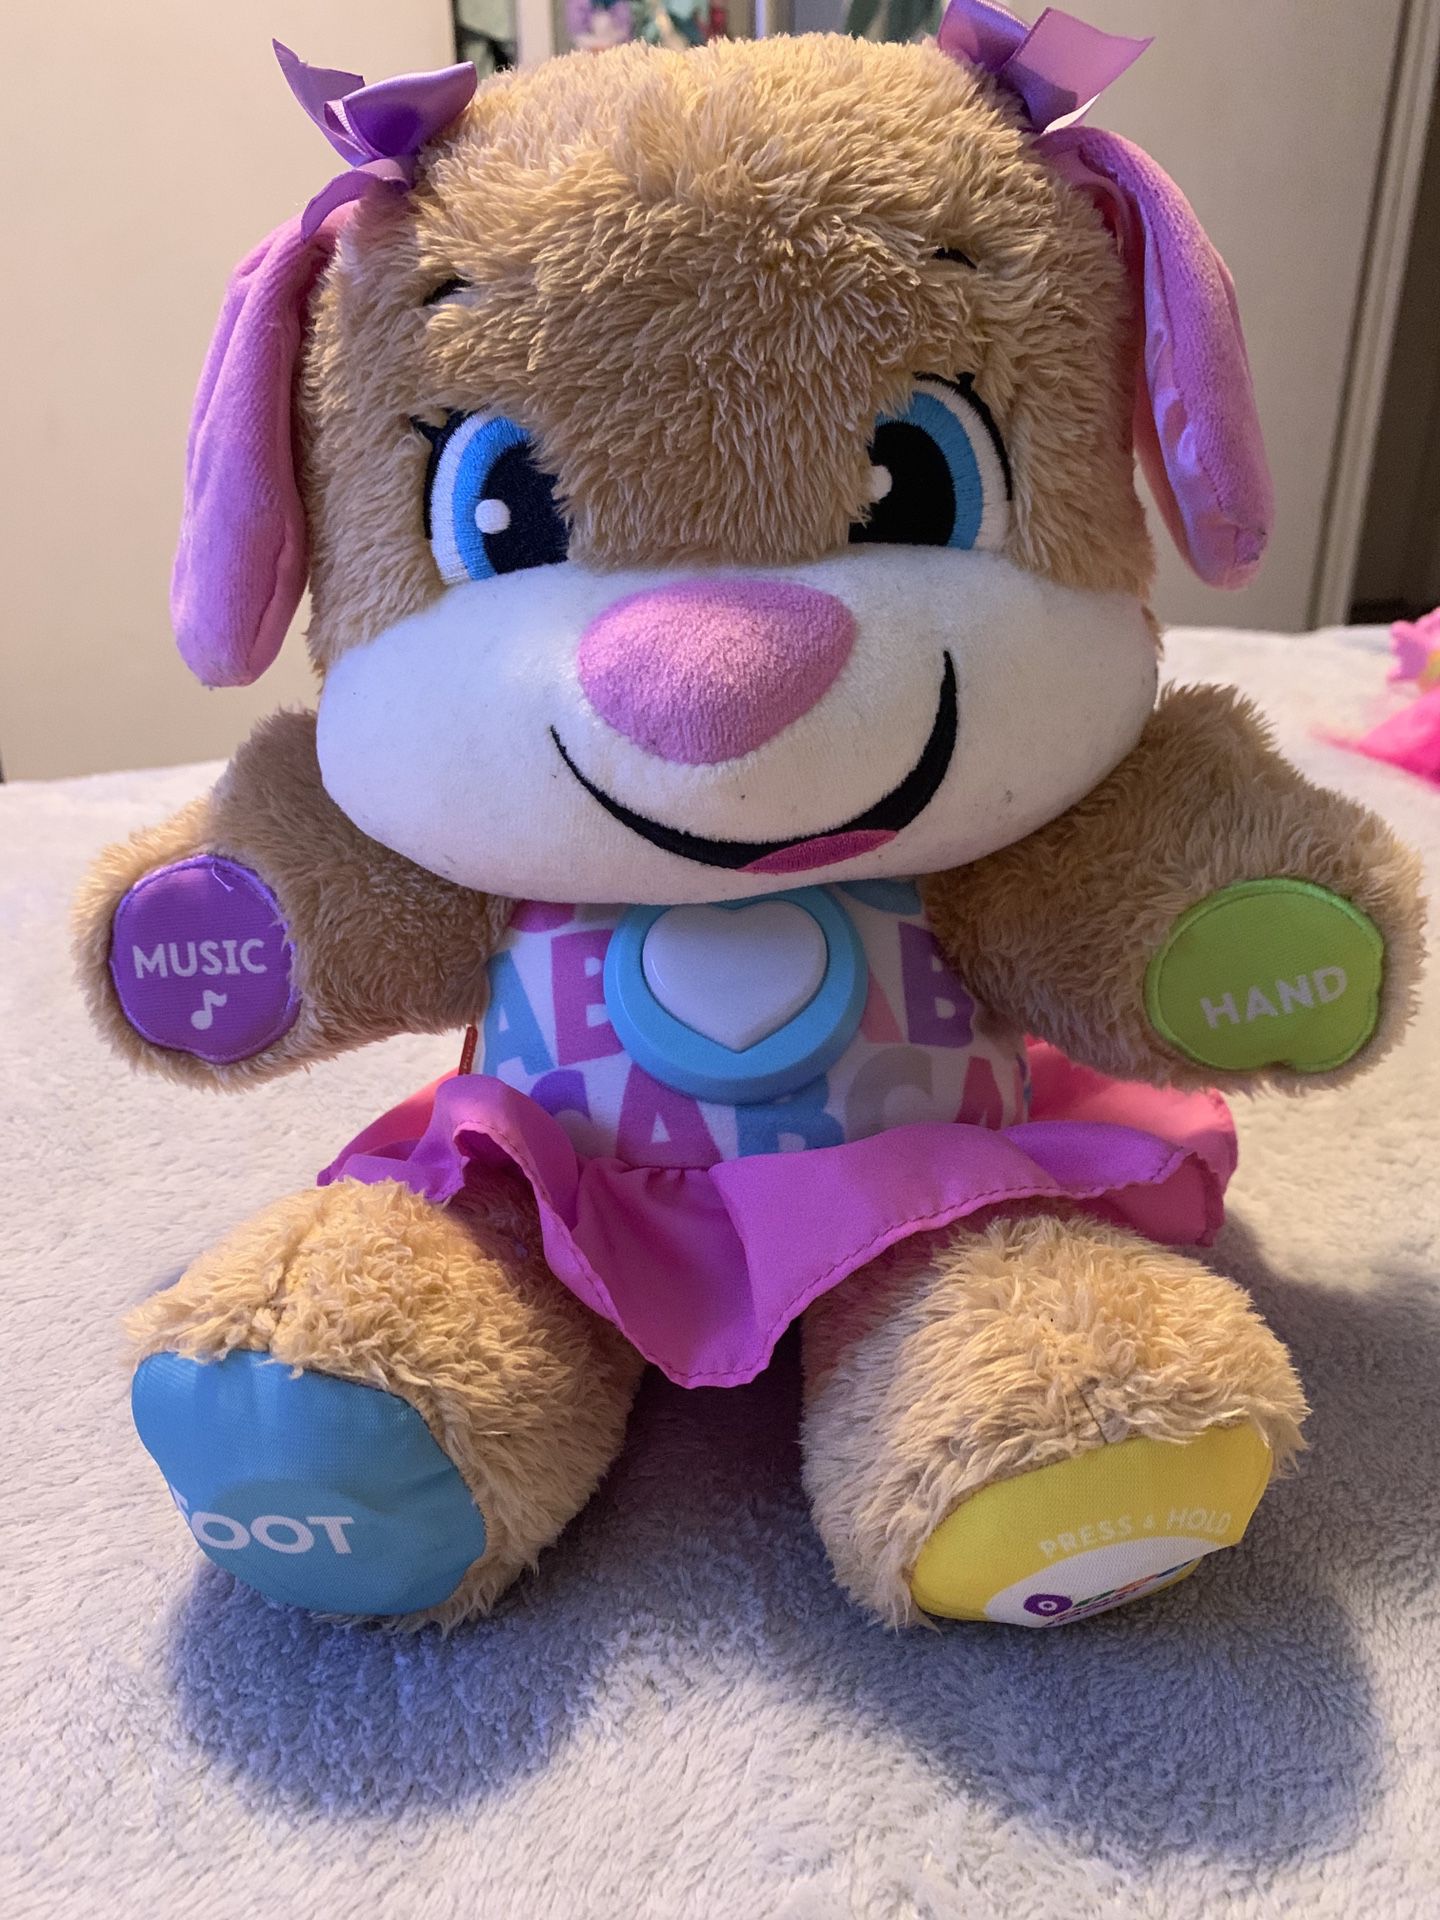 Fisher Price Laugh Learn Sing & Play ABC Tummy Puppy Girl Bear Musical Talking Interactive Education Toy 15 Inch Plush Stuffed Animal With Battery